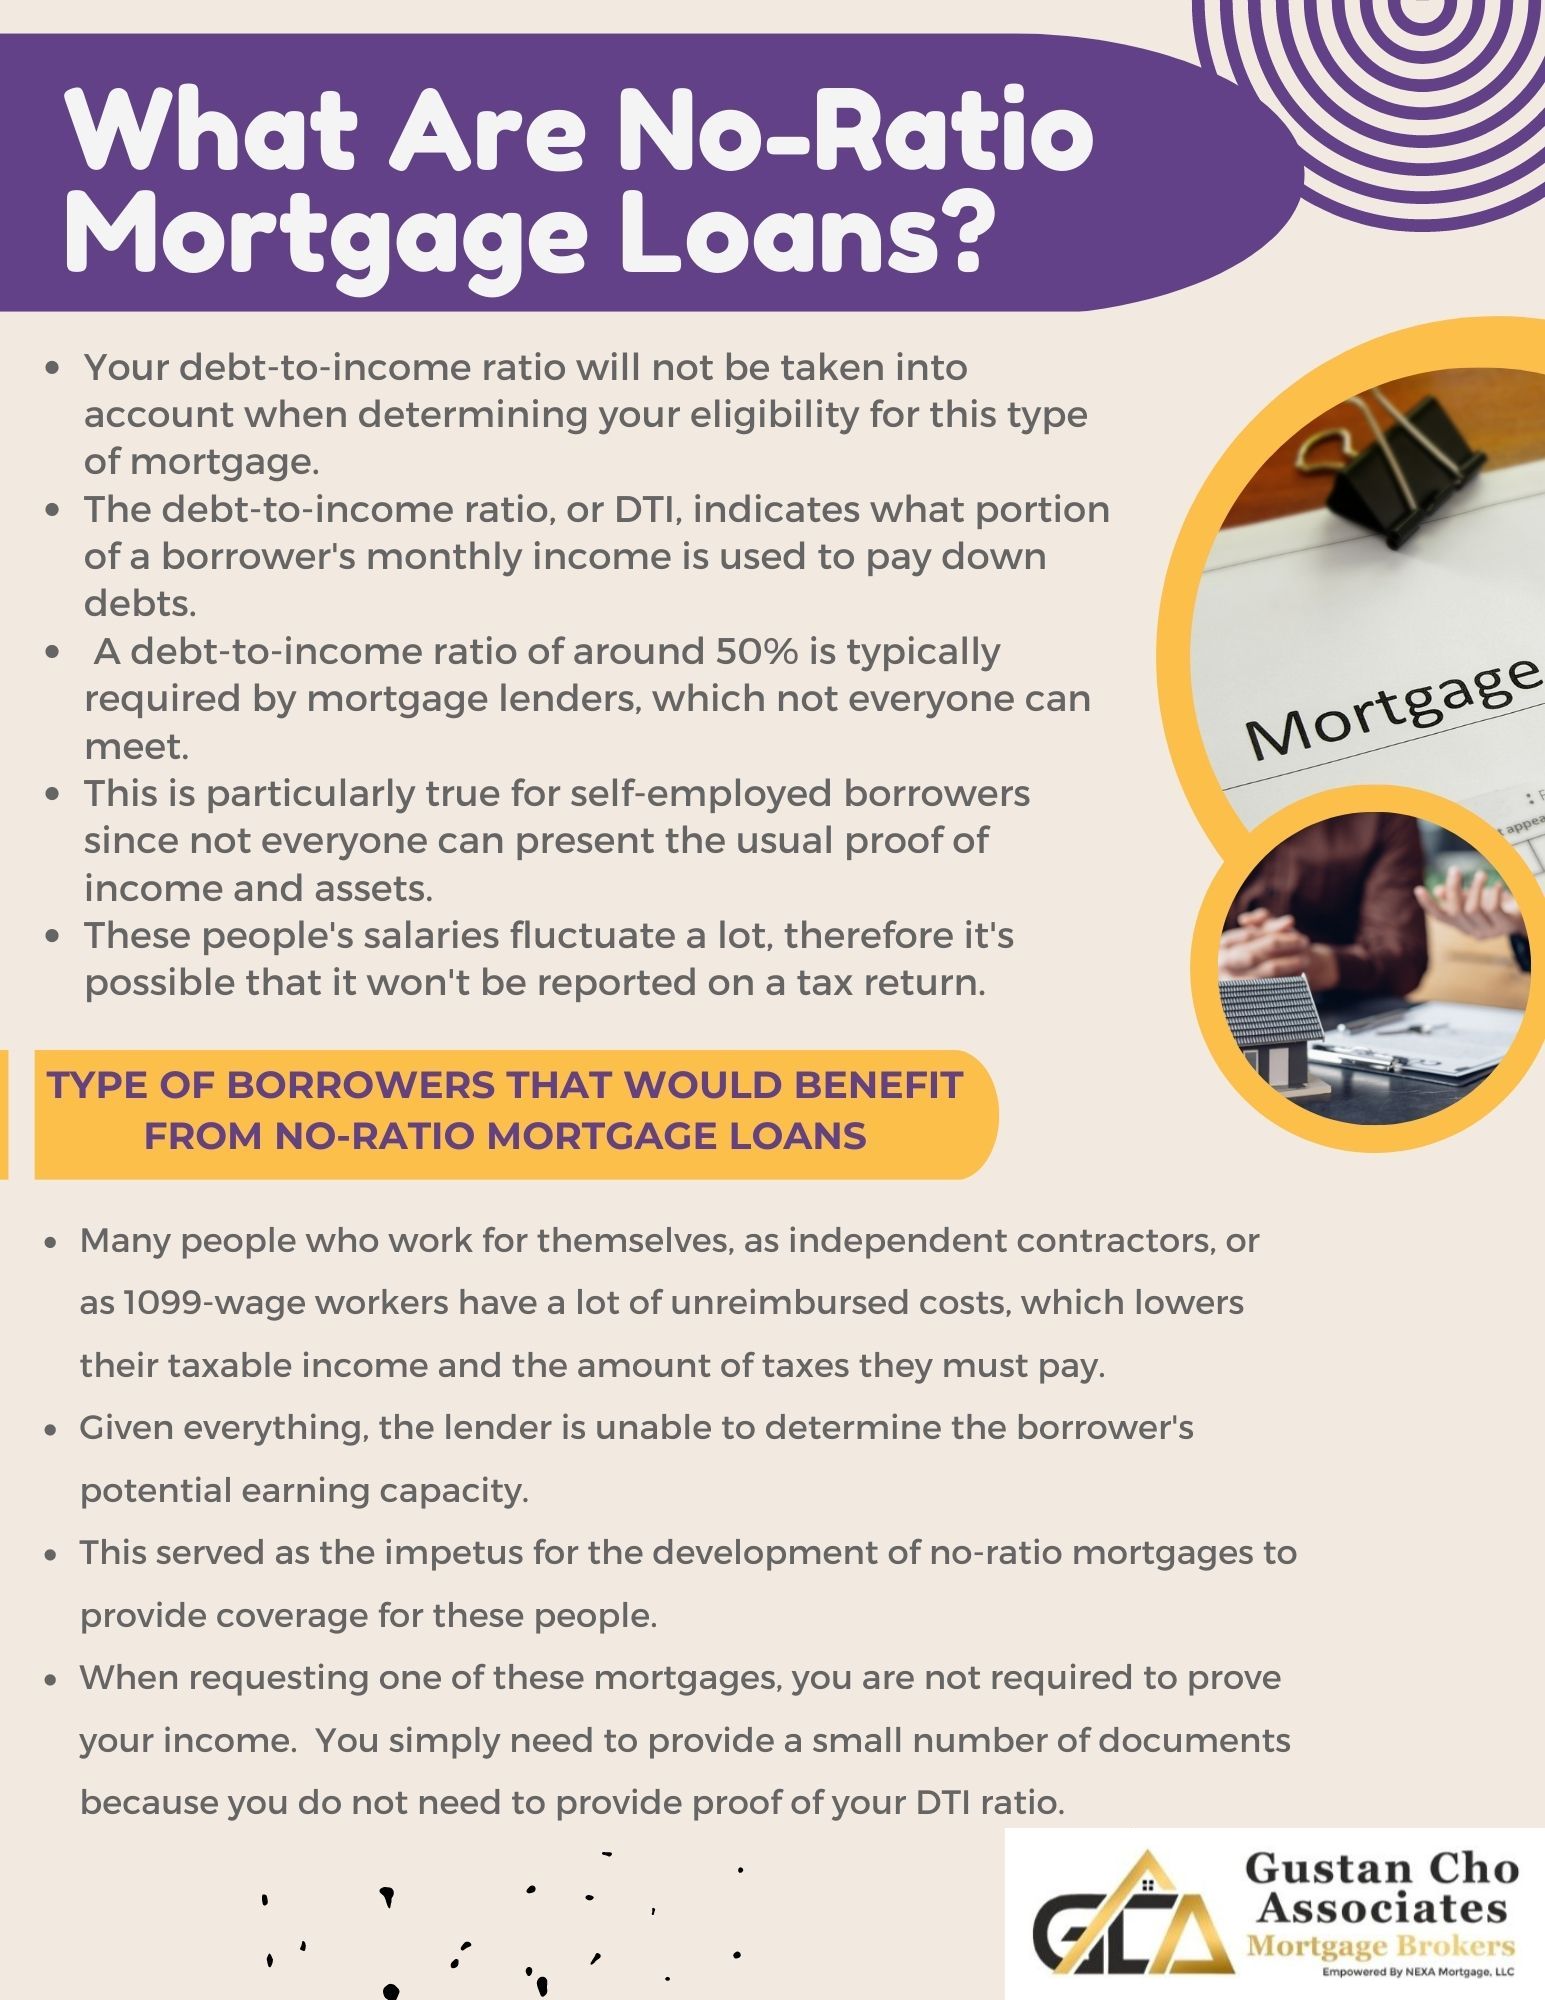 What Are No-Ratio Mortgage Loans